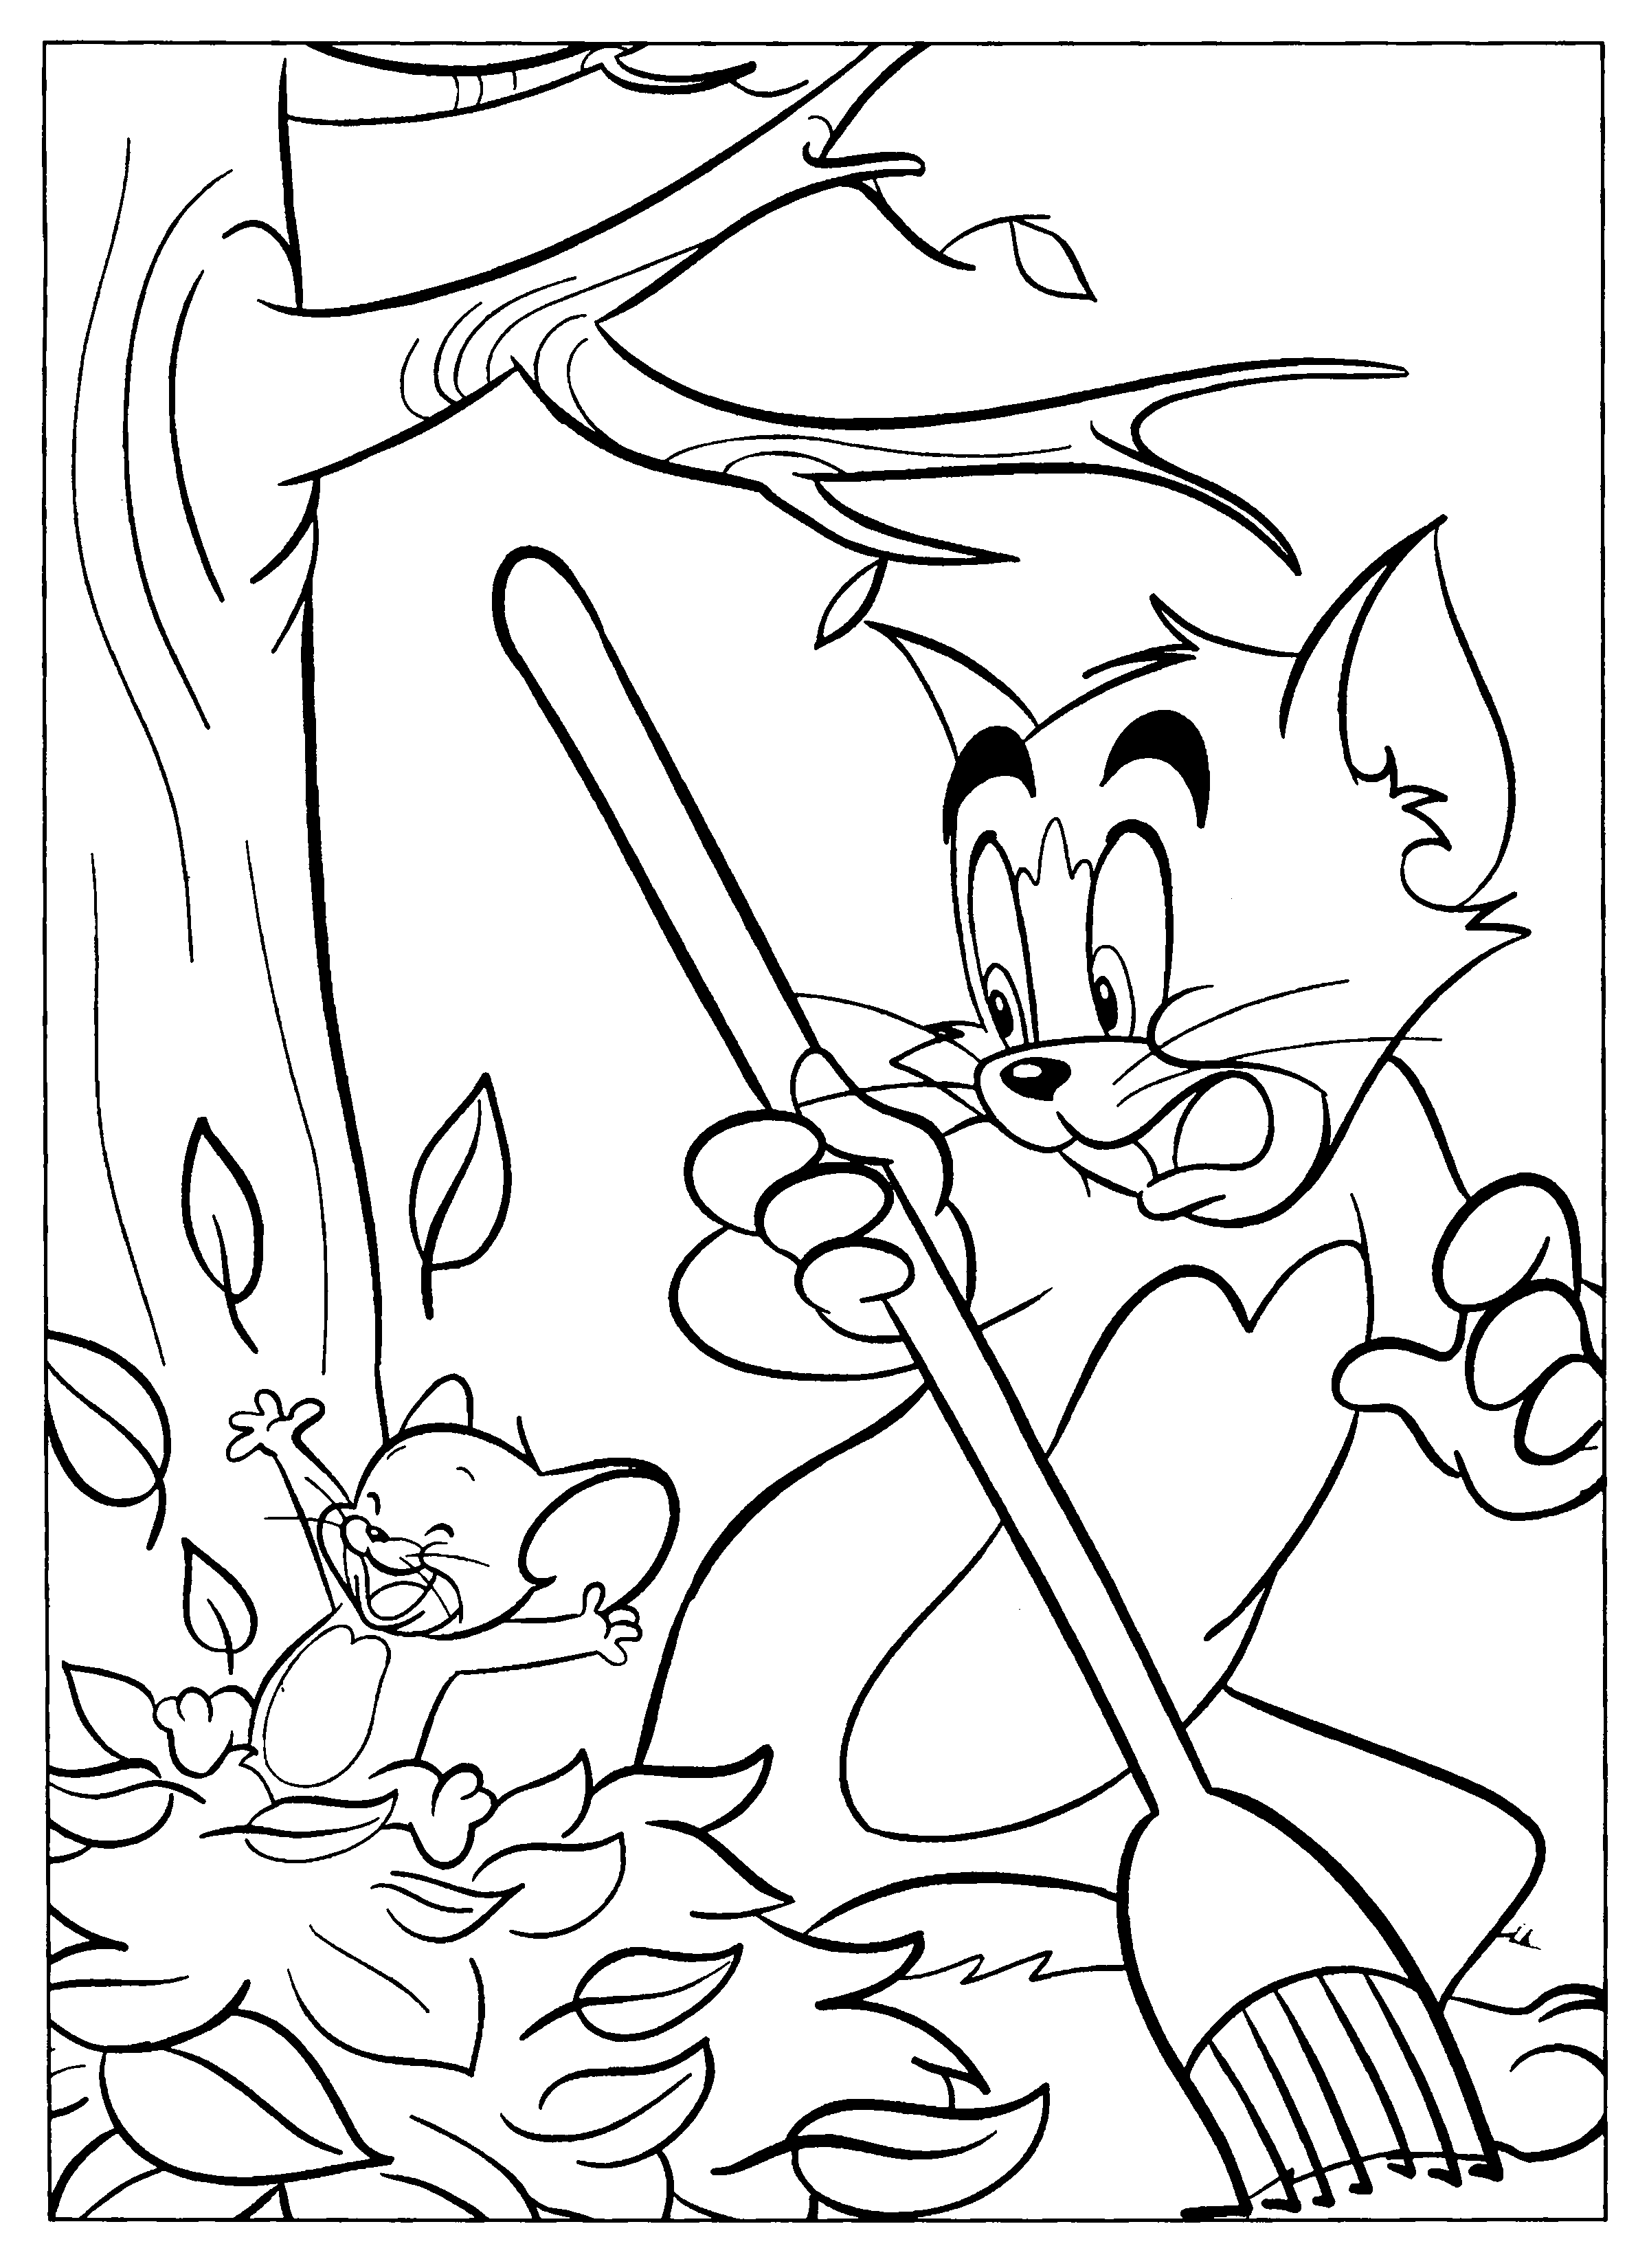 Tom and jerry Coloring Pages - Coloringpages1001.com